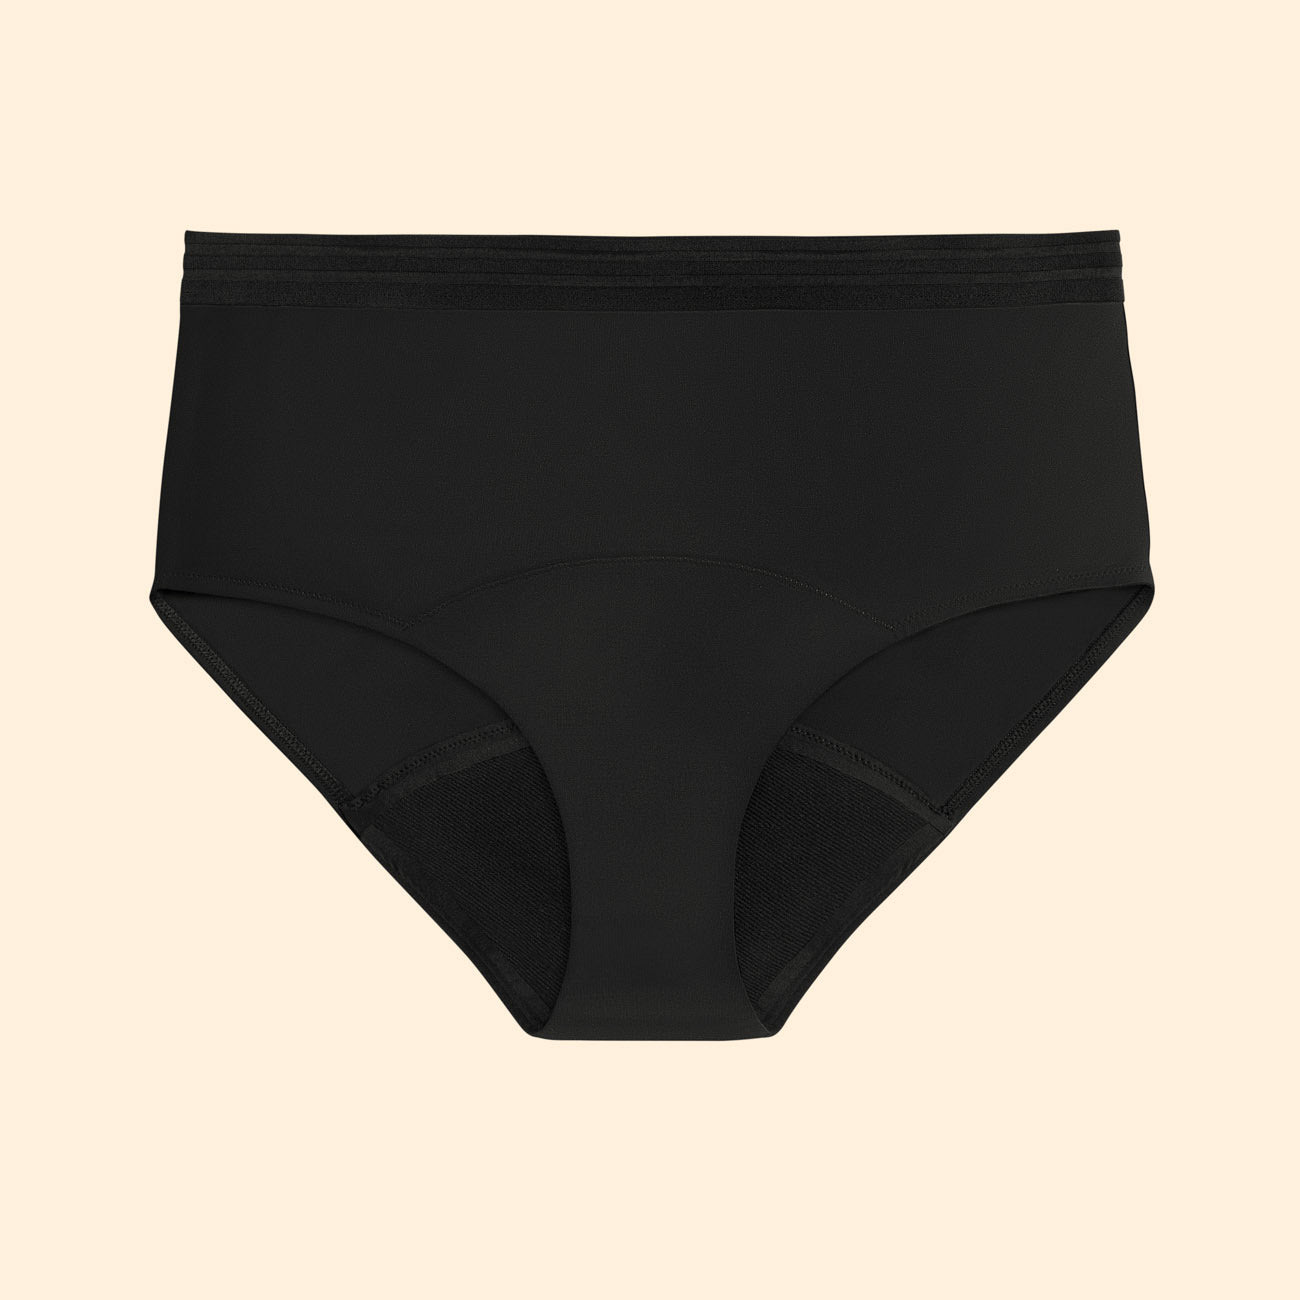 Speax by Thinx Hiphugger Incontinence Panty